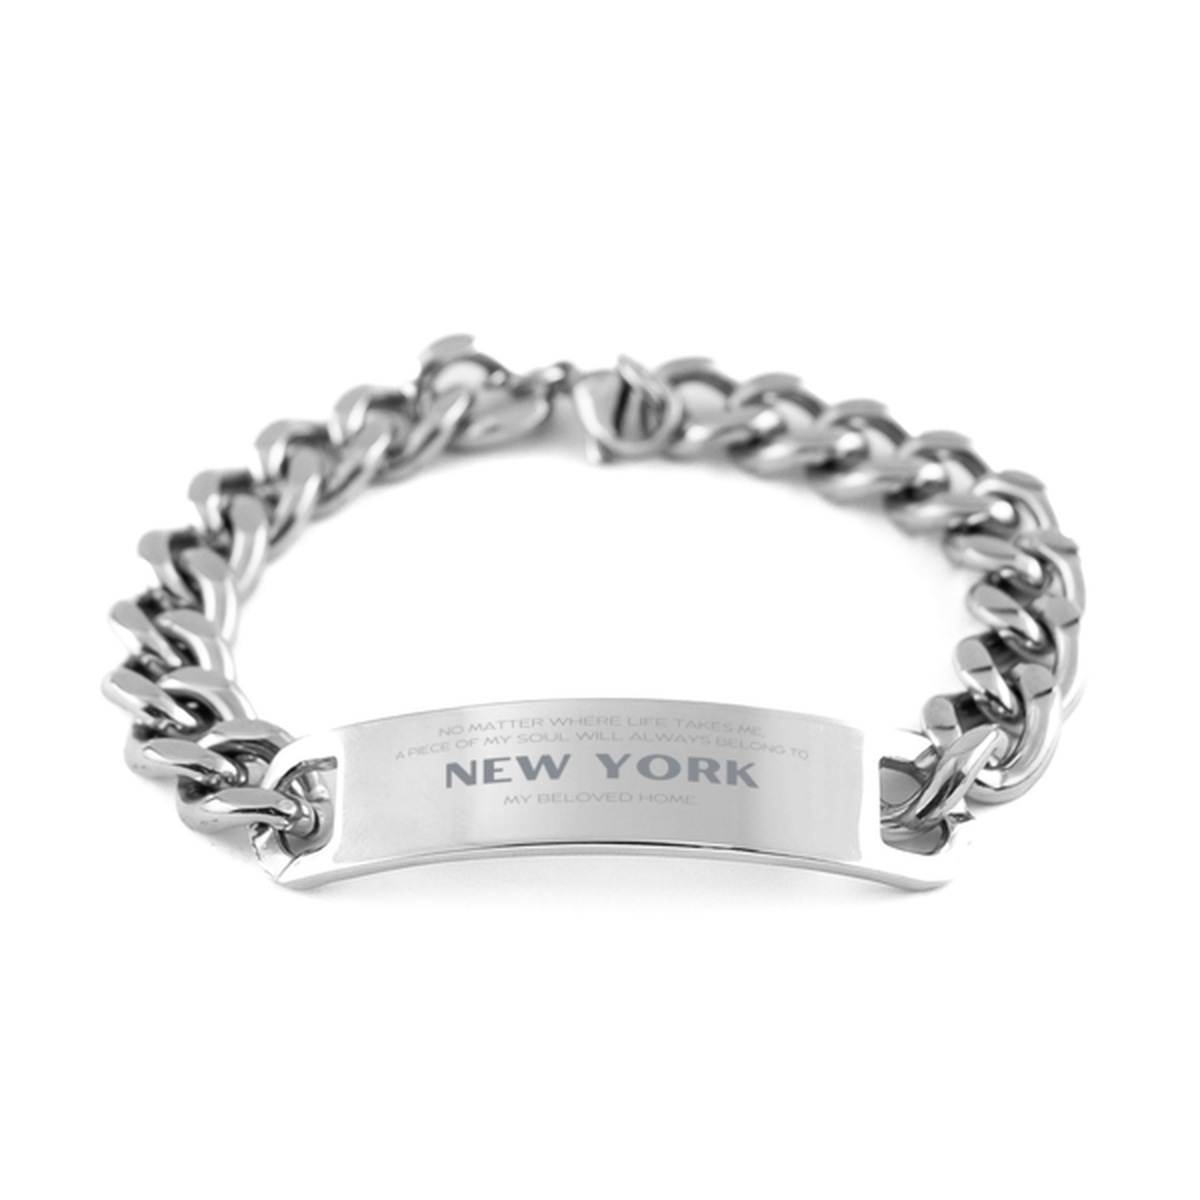 Love New York State Gifts, My soul will always belong to New York, Proud Cuban Chain Stainless Steel Bracelet, Birthday Unique Gifts For New York Men, Women, Friends